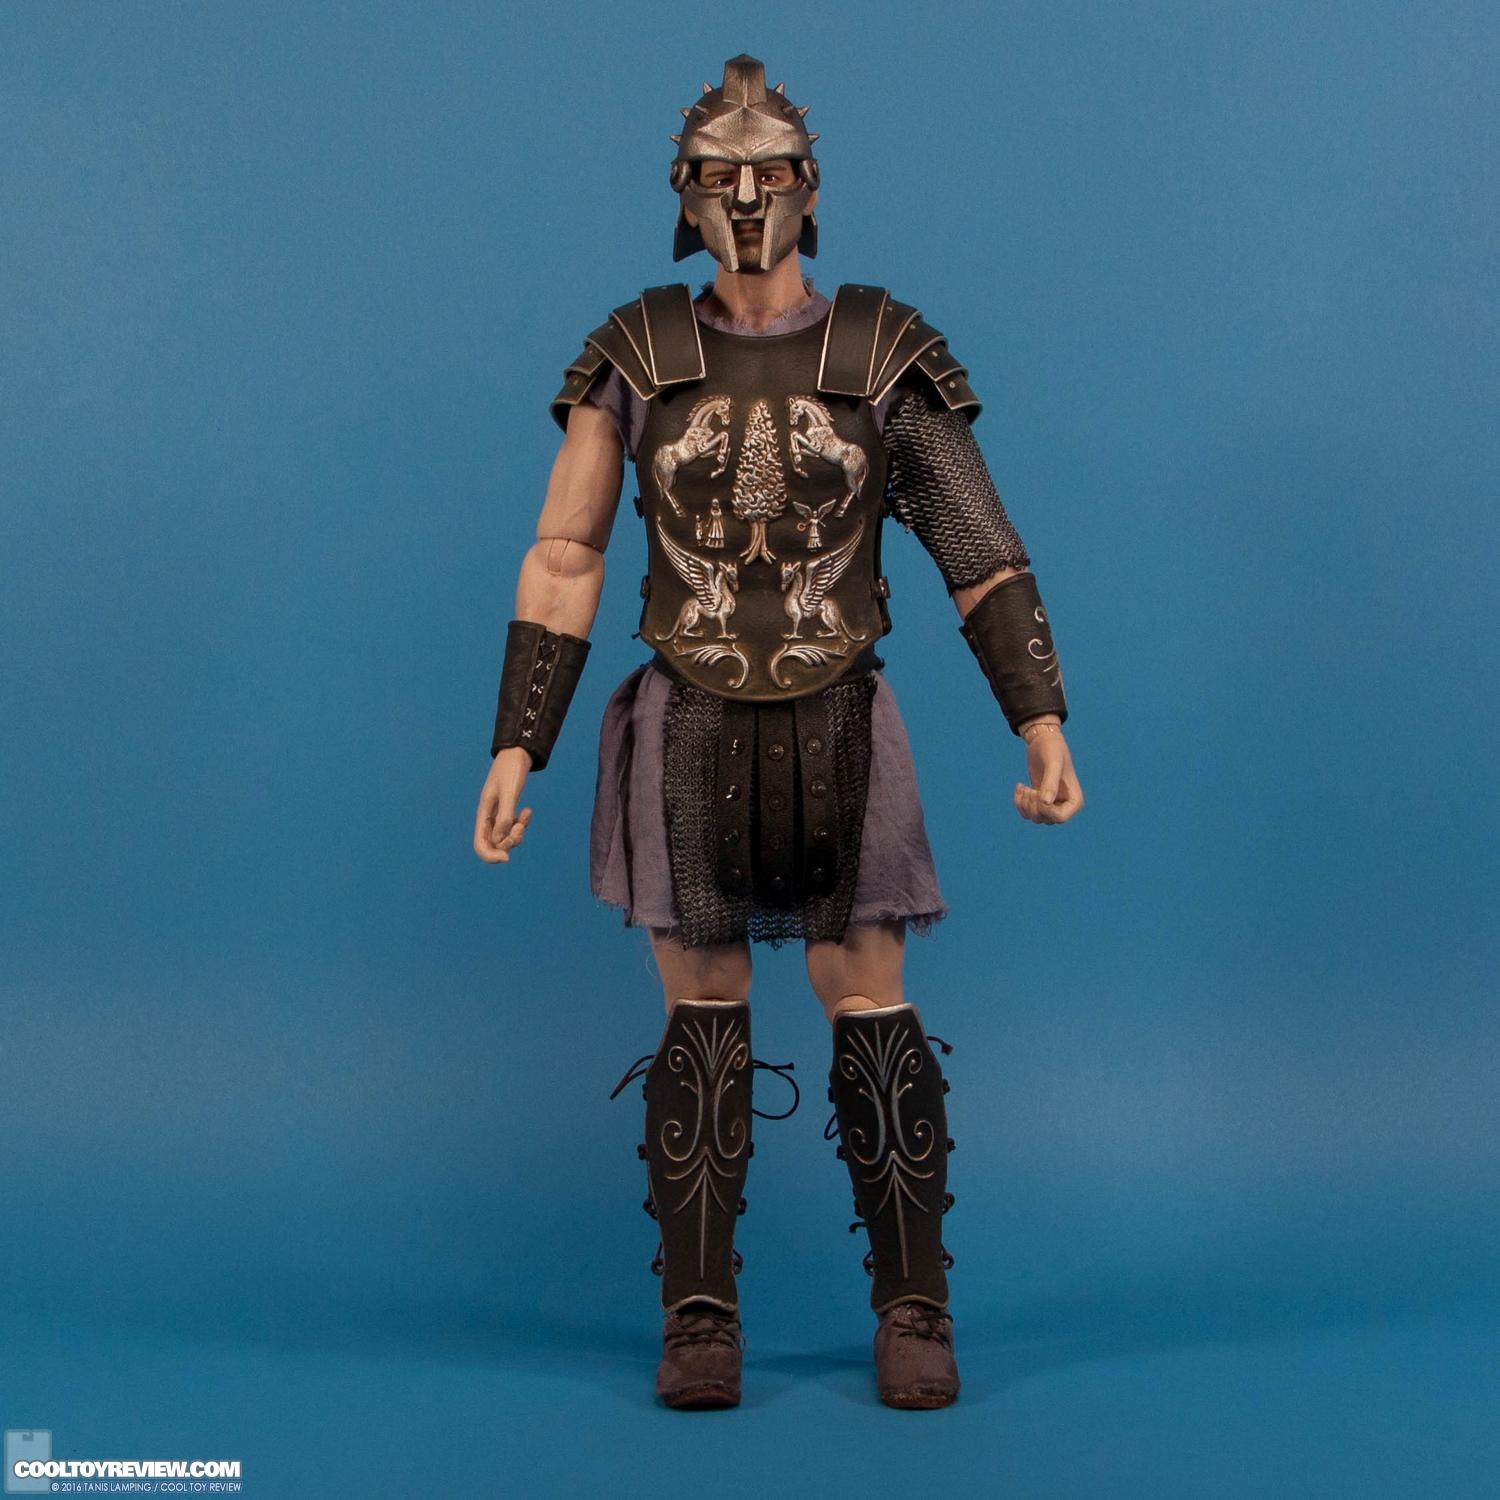 pangaea-toy-gladiator-general-sixth-scale-collectible-figure-009.jpg